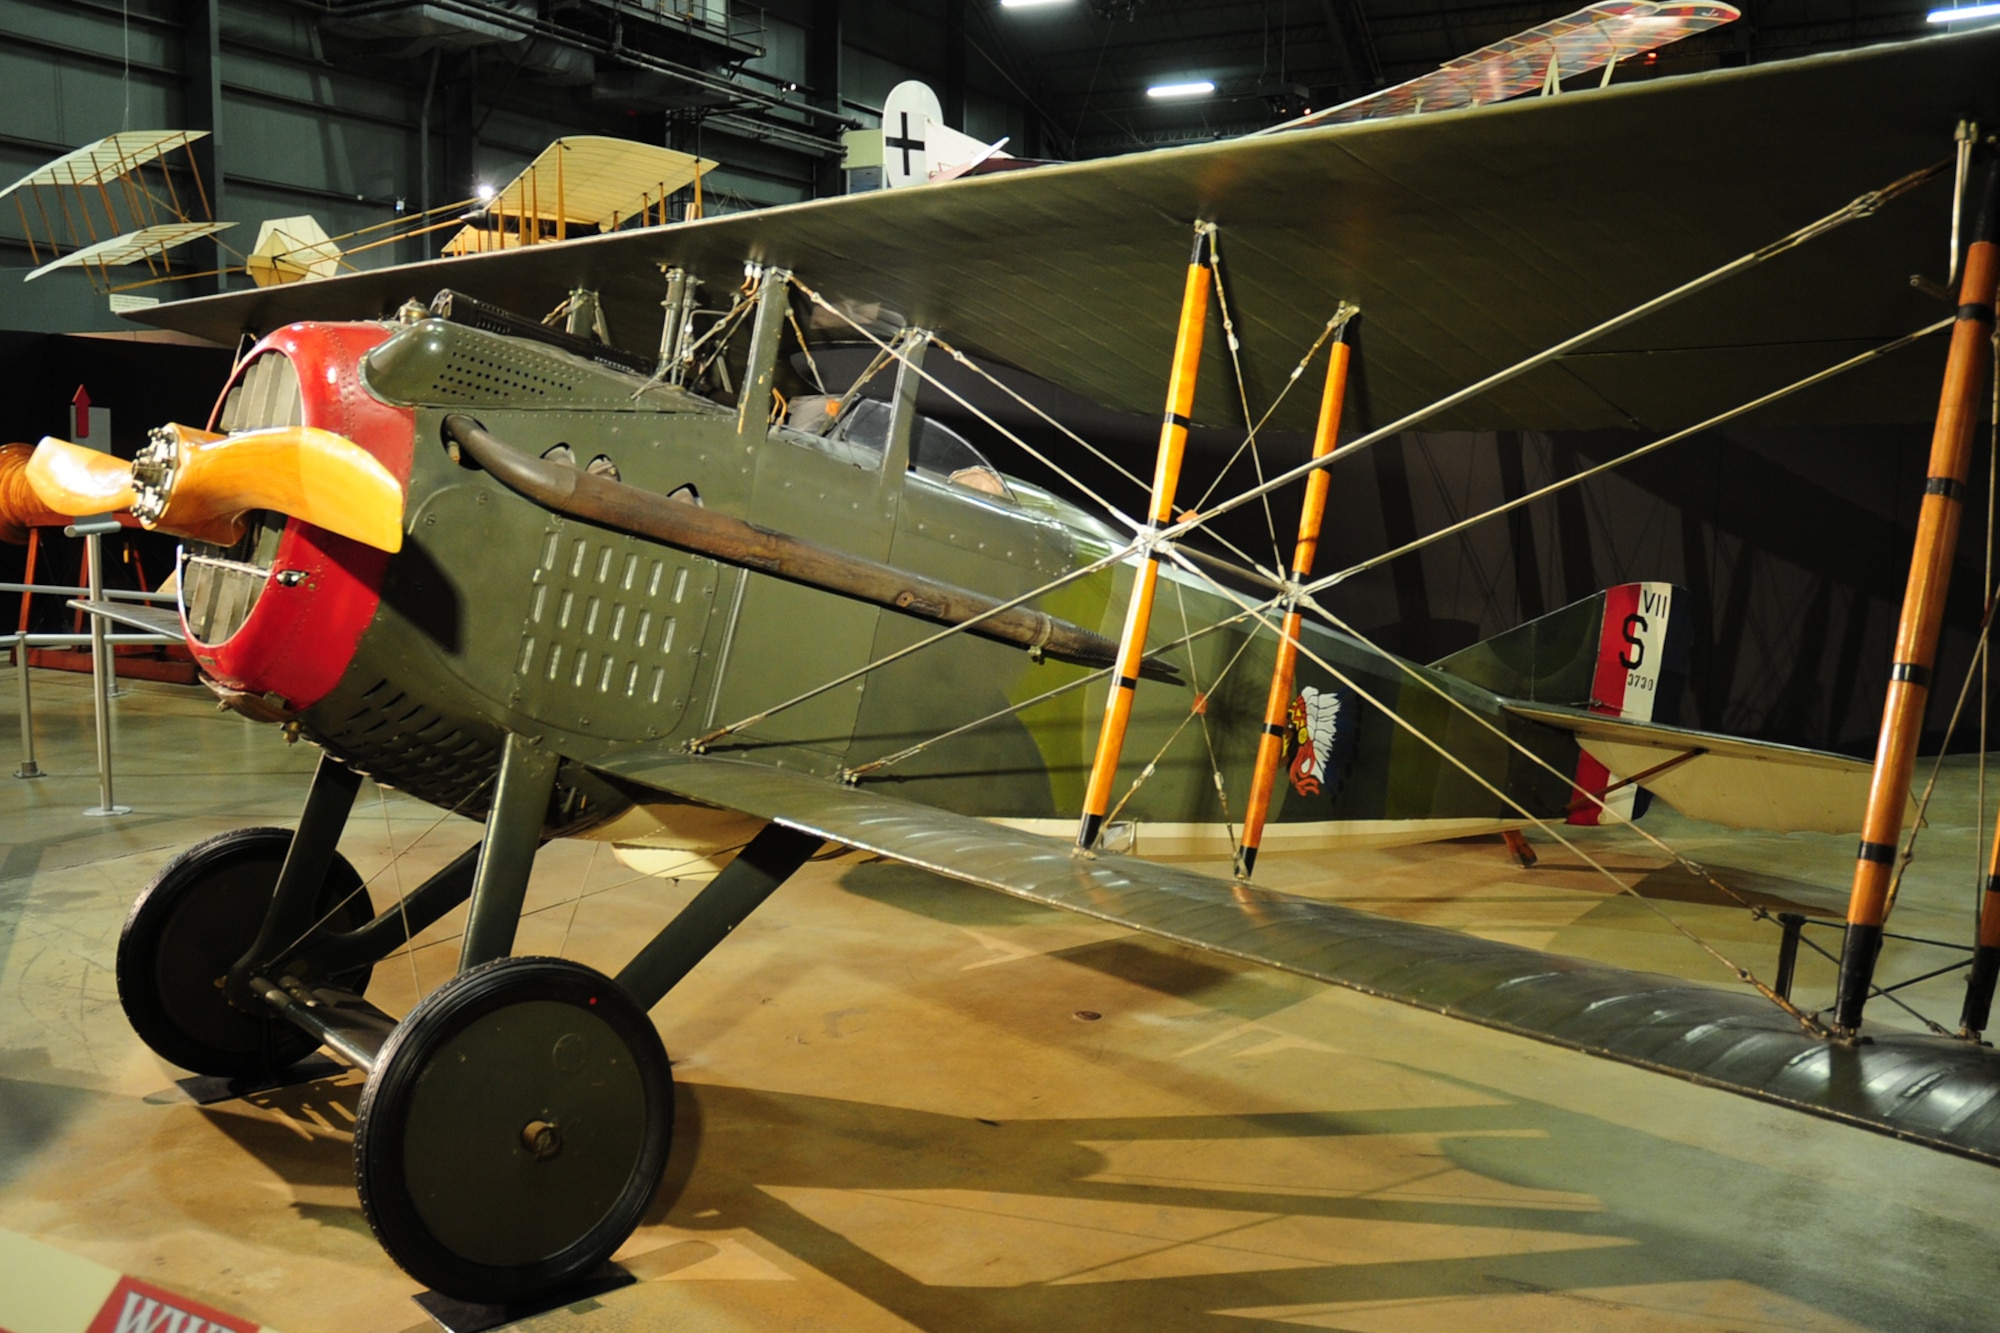 DAYTON, Ohio -- SPAD VII in the Early Years Gallery at the National Museum of the United States Air Force. (U.S. Air Force photo)